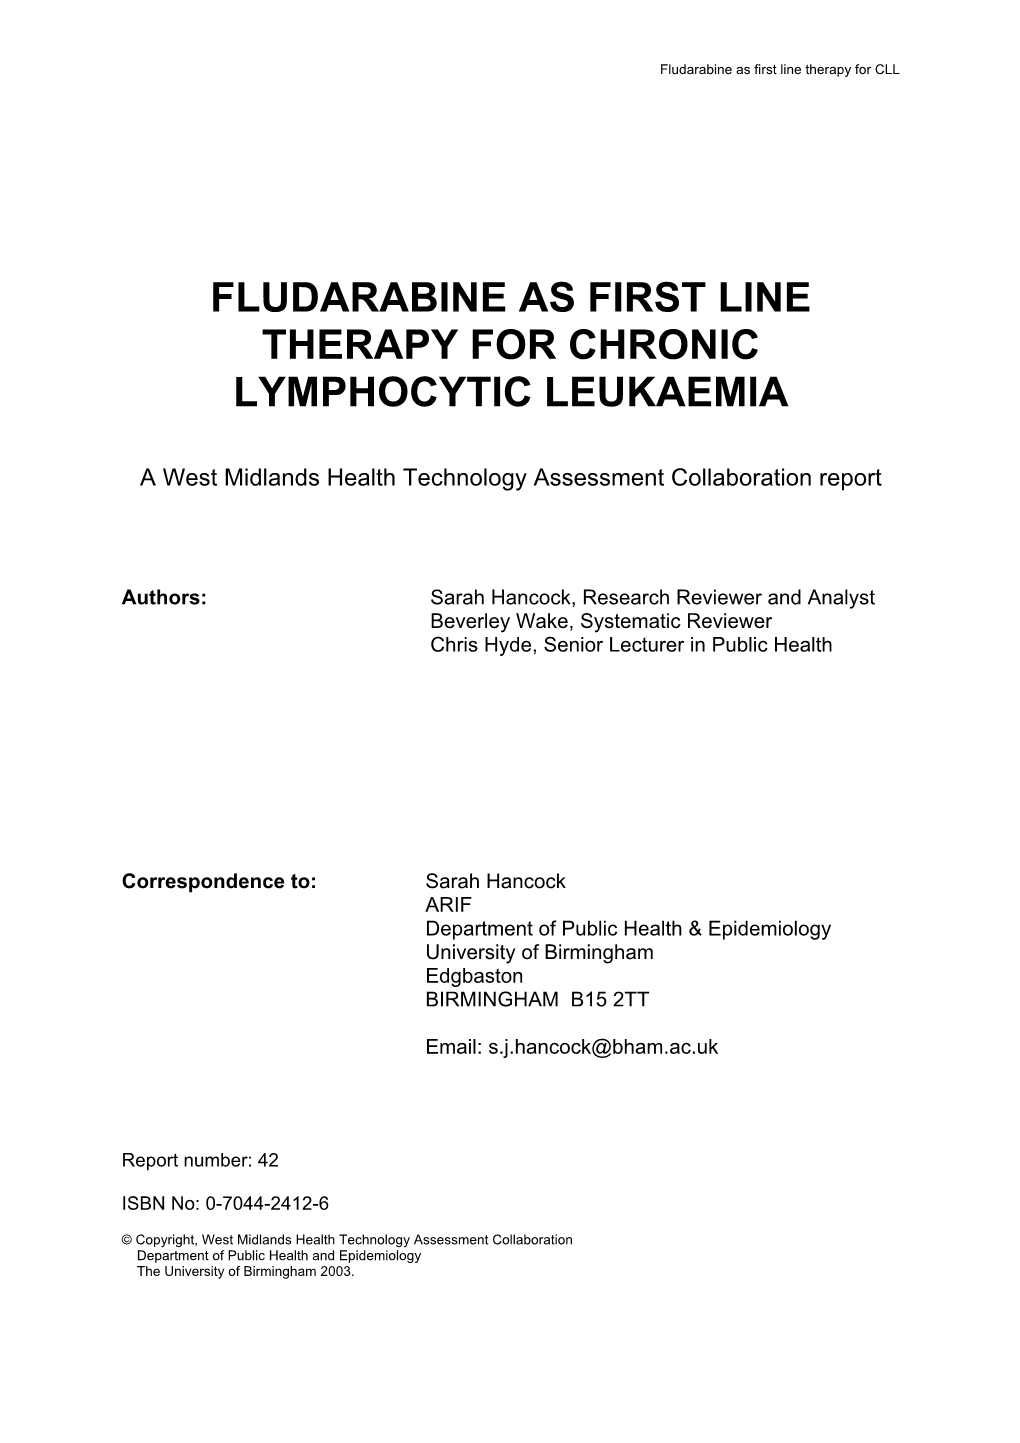 Fludarabine As First Line Therapy for Chronic Lymphocytic Leukaemia